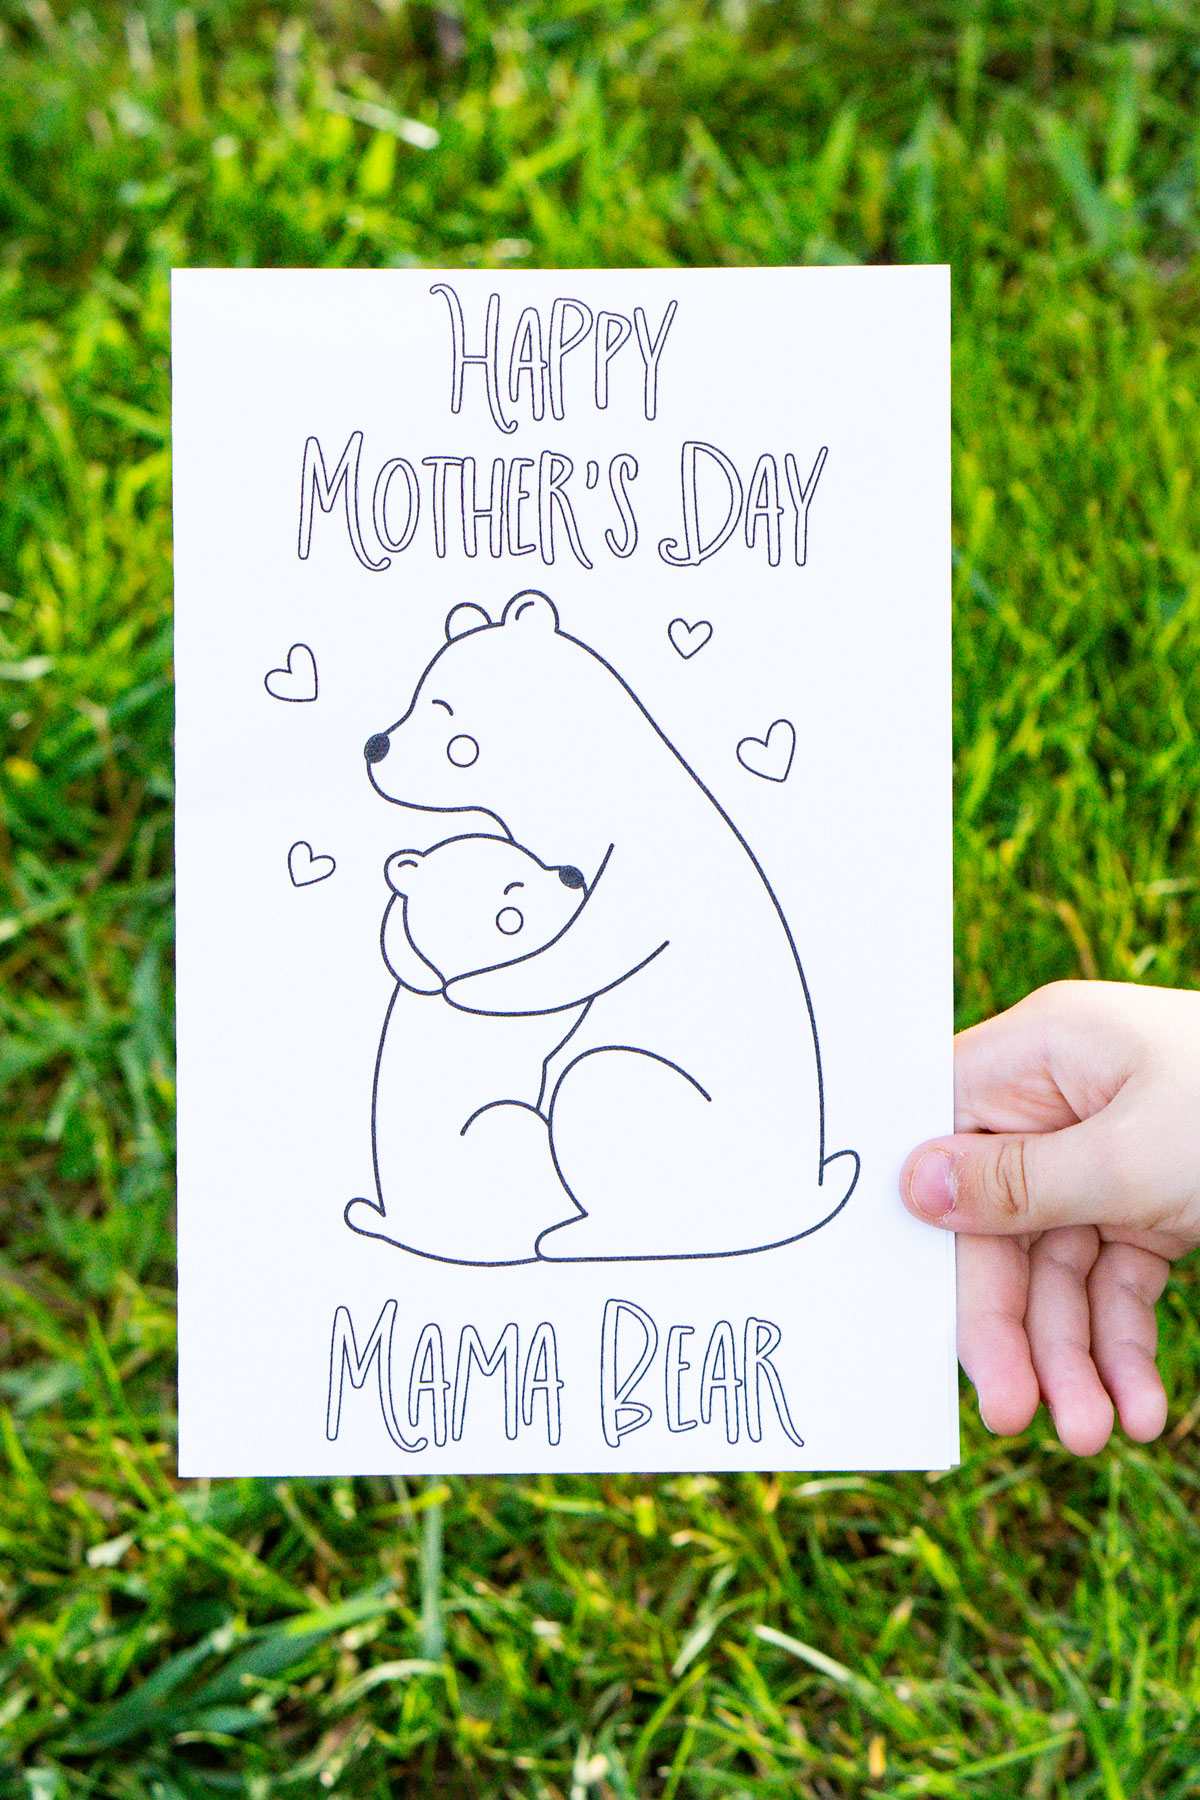 This is the picture of one of the free printable Mother's Day cards to color. This card says Happy Mother's Day Mama Bear and shows a mom bear hugging a baby bear.